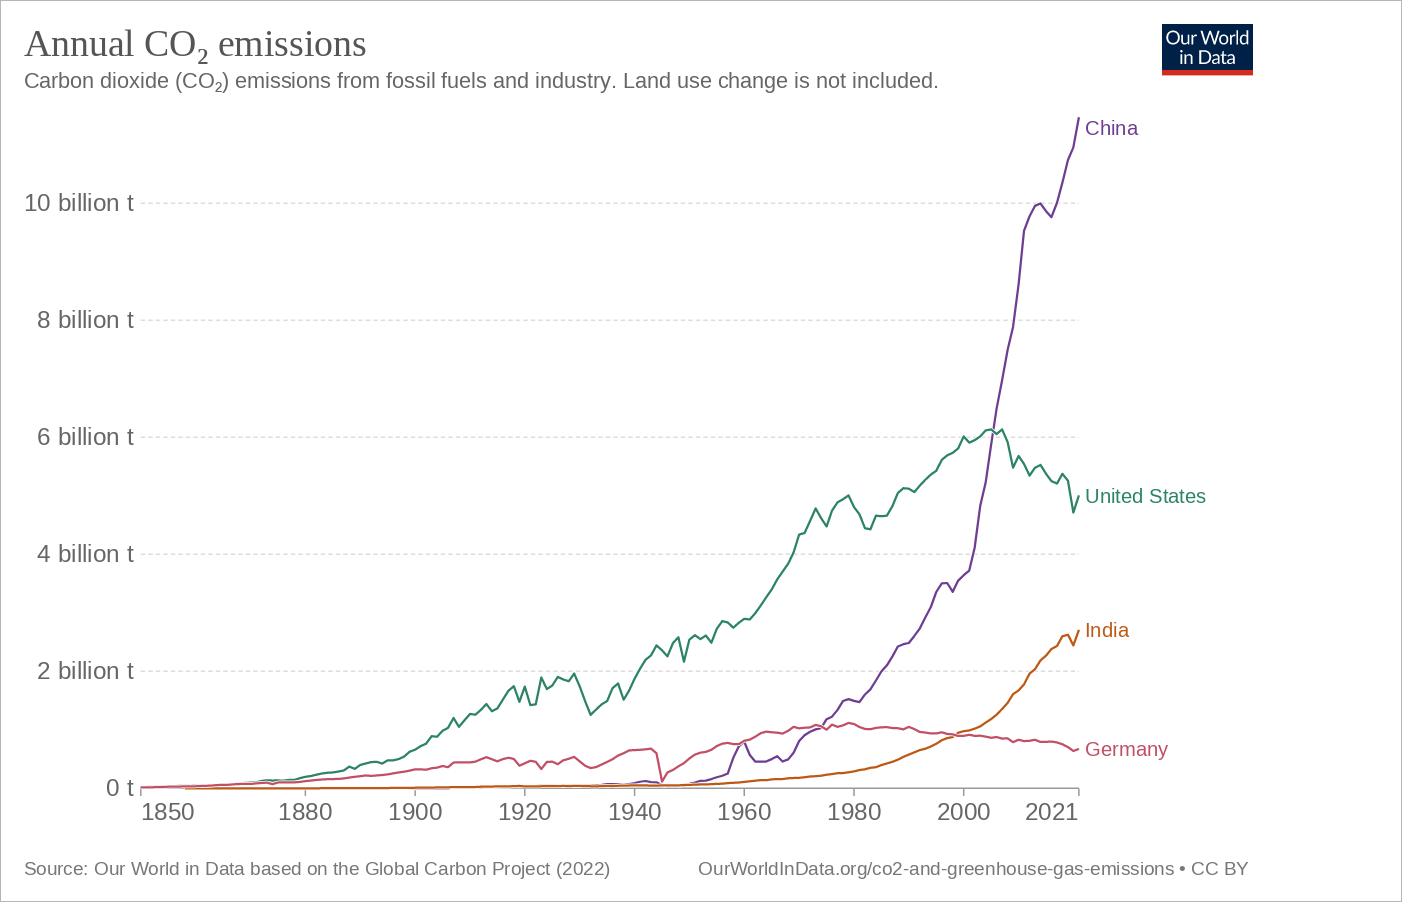 Annual CO2 Emissions